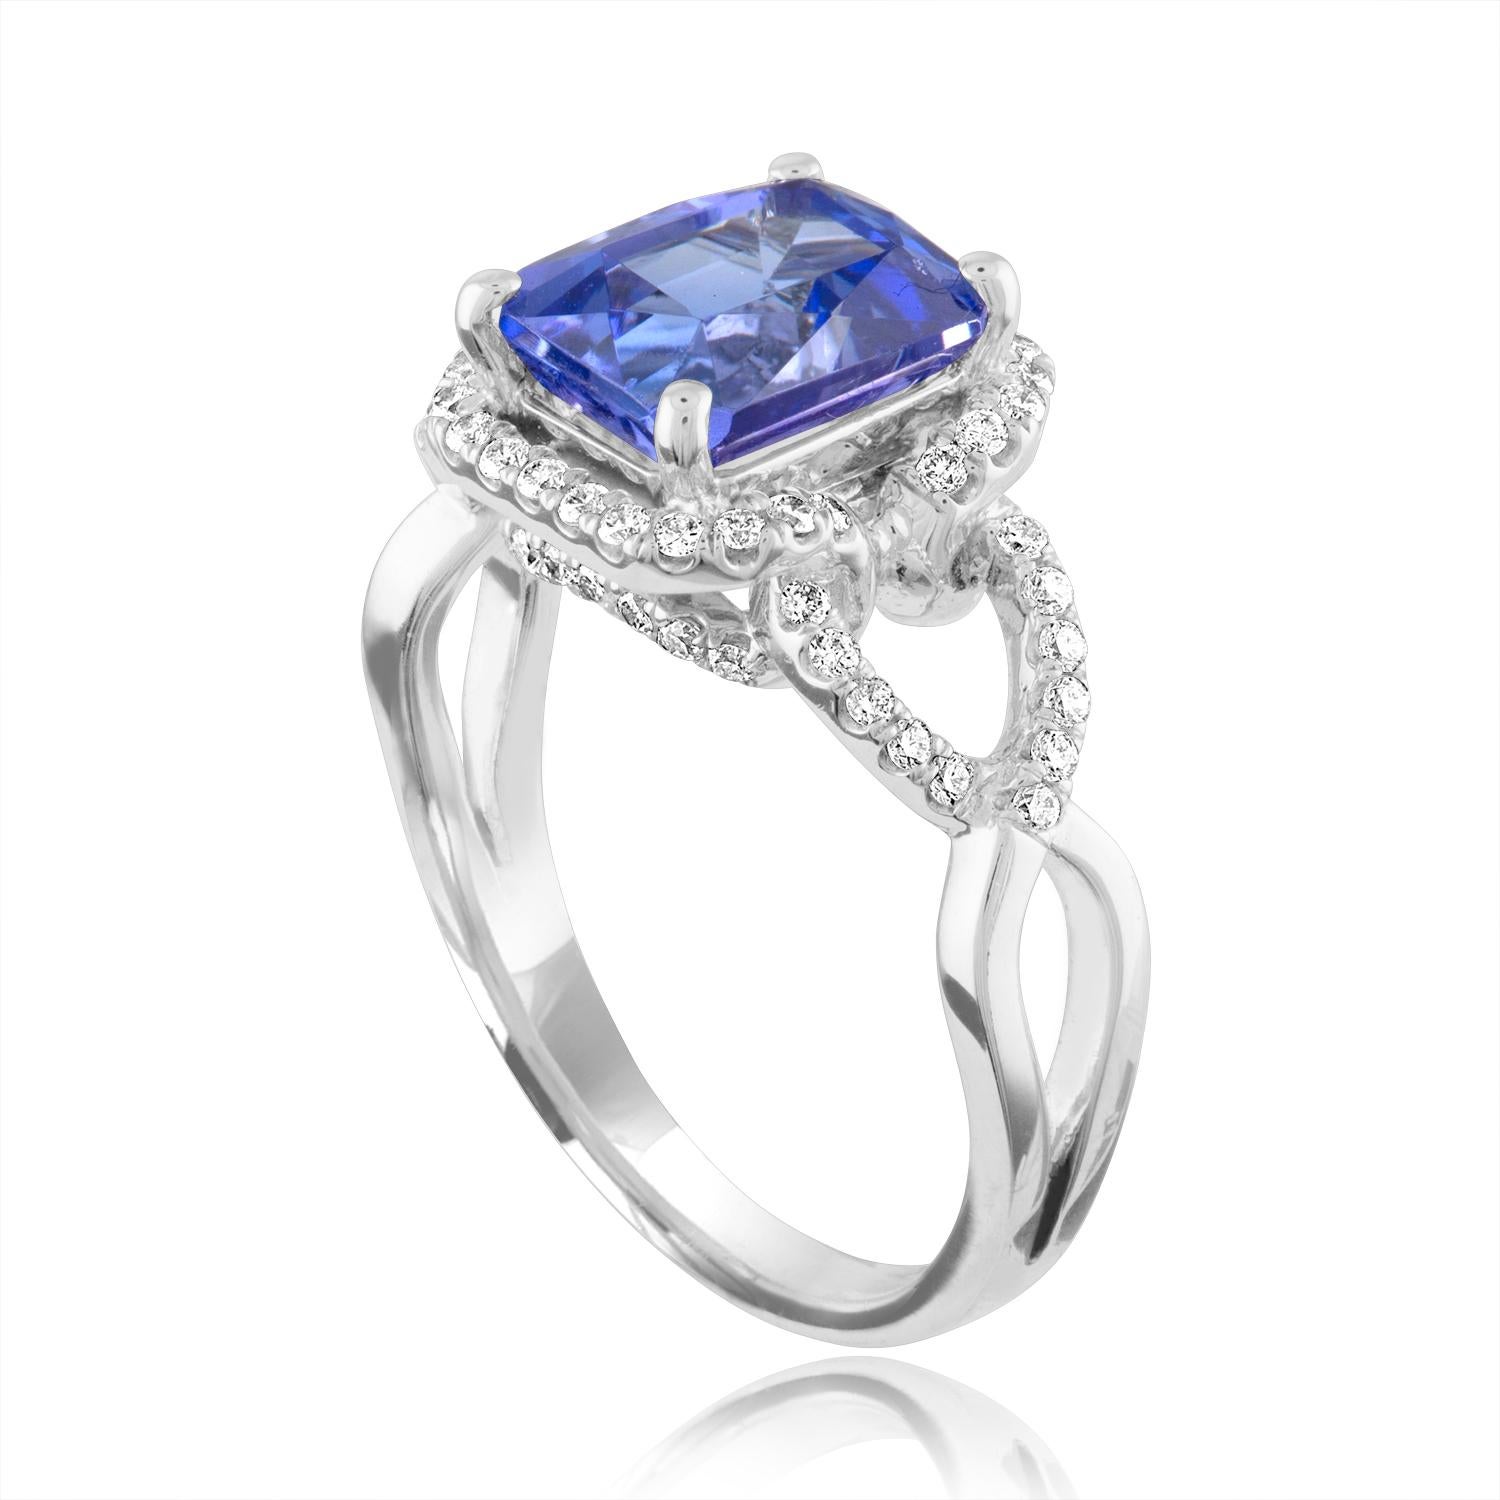 Beautiful Tanzanite Ring
The ring is 18K White Gold
The Center Stone is a Radiant Cut Tanzanite 2.97 Carats
There are 0.35 Carats in Diamonds F/G VS/SI
The ring is a size 6.75, sizable
The ring weighs 5.5 grams